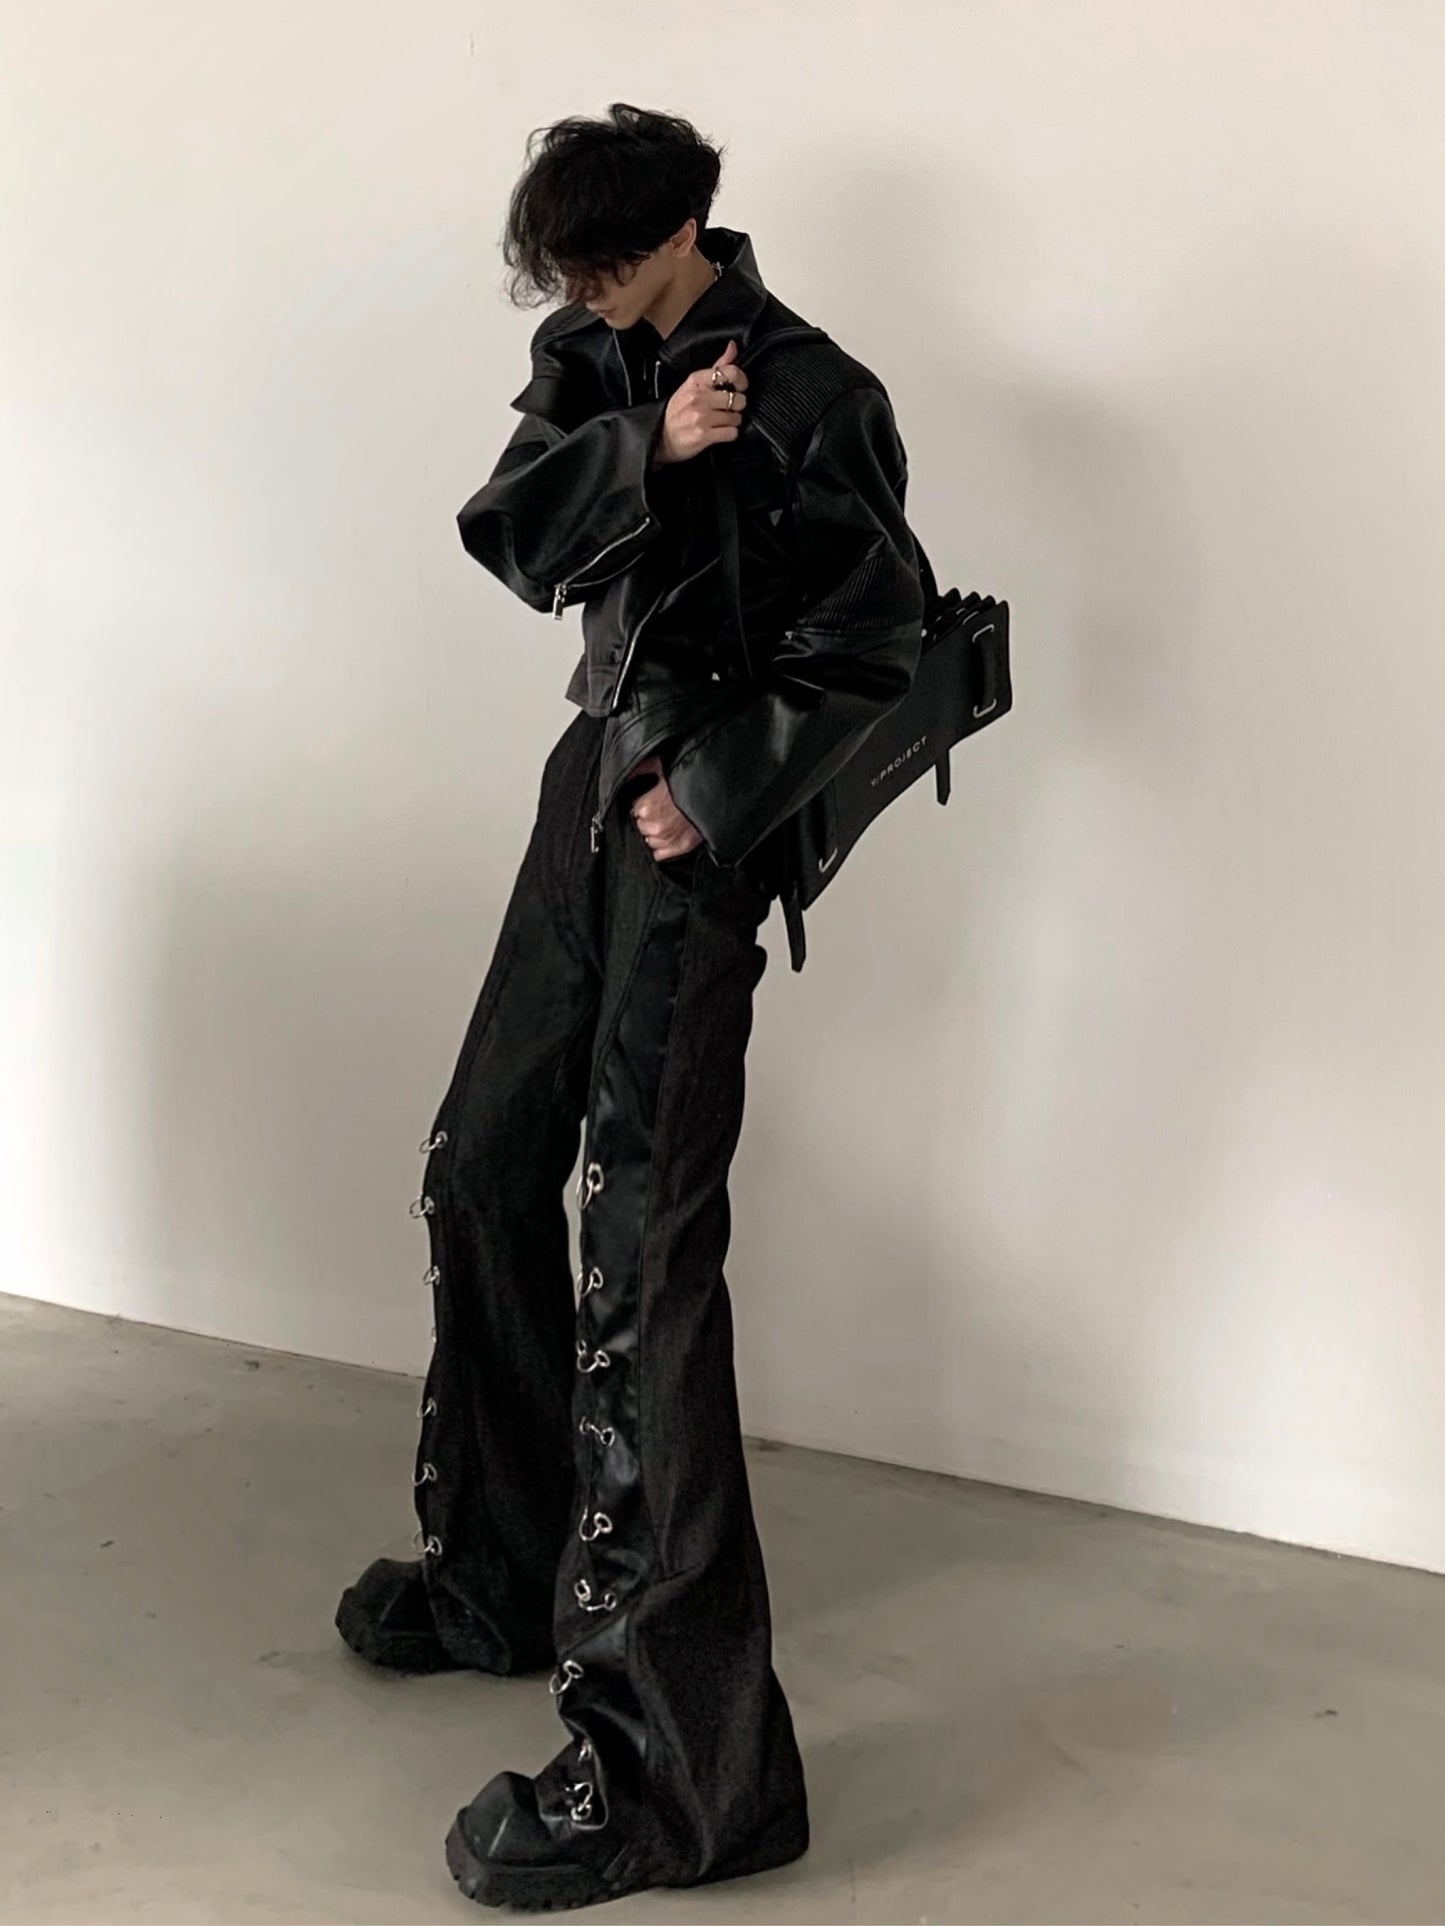 【24s March.】Deconstructed Black Leather Jacket